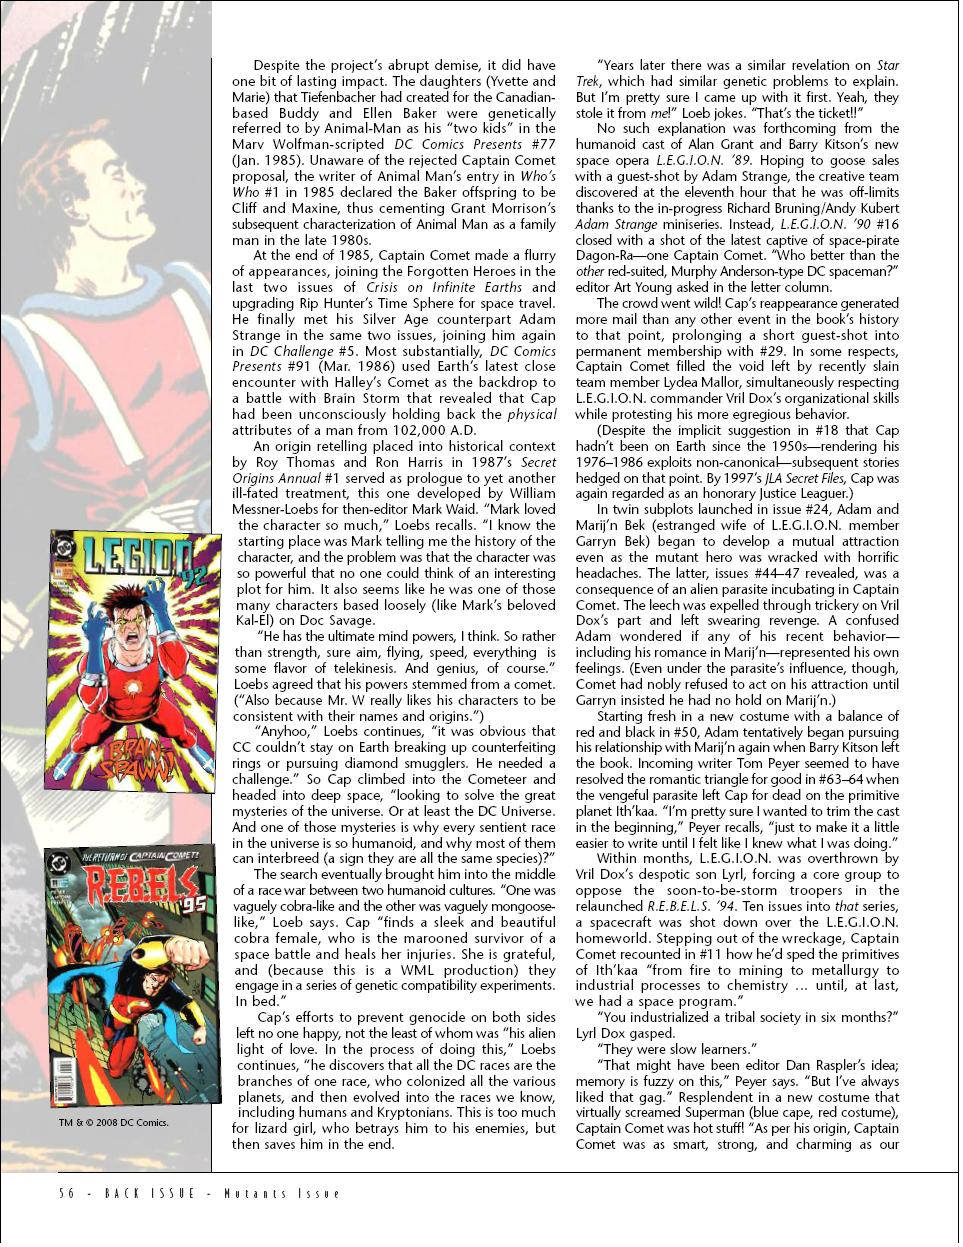 Read online Back Issue comic -  Issue #29 - 58